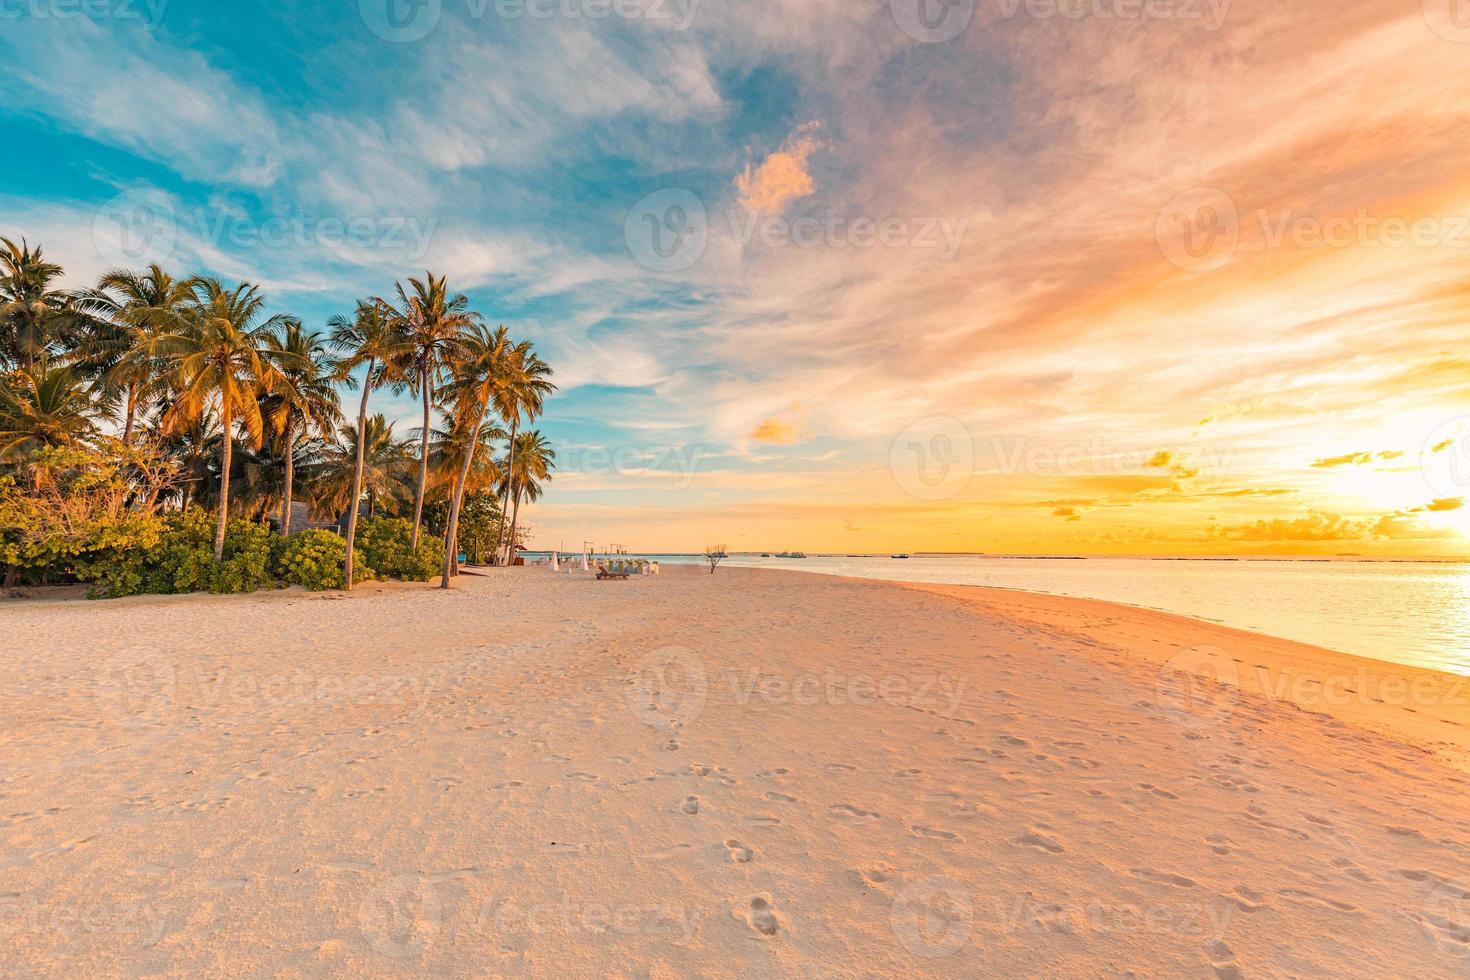 Island palm tree sea sand beach. Panoramic beach landscape. Inspire tropical beach seascape horizon. Orange and golden sunset sky calmness tranquil relaxing summer mood. Vacation travel holiday banner photo